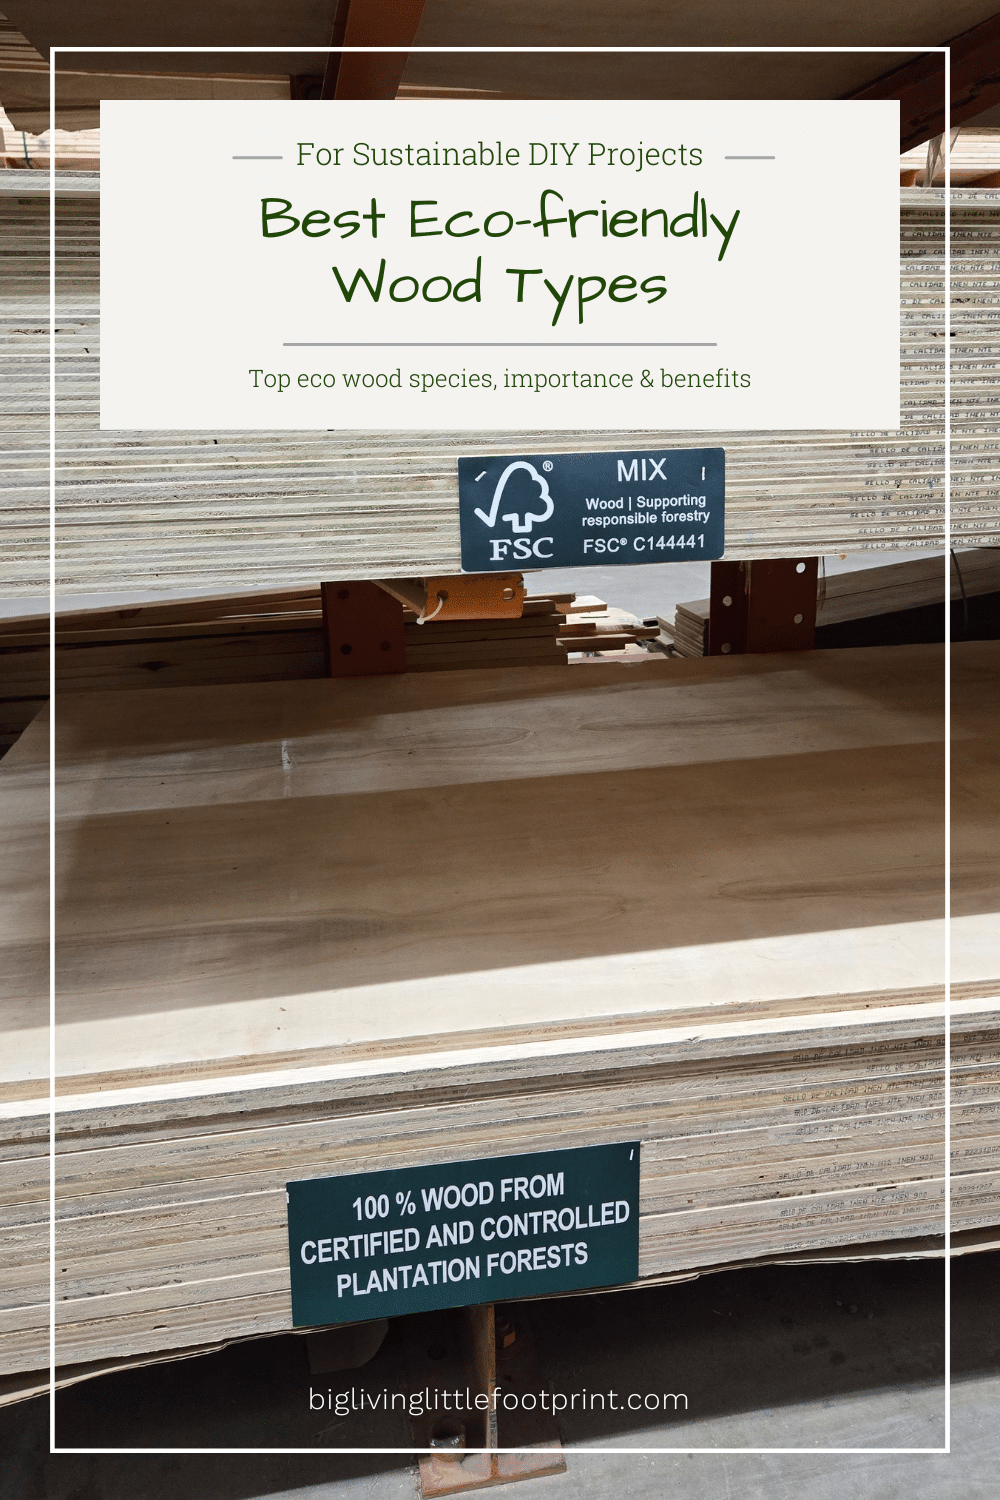 Best Eco-friendly Wood Types For Sustainable DIY Projects